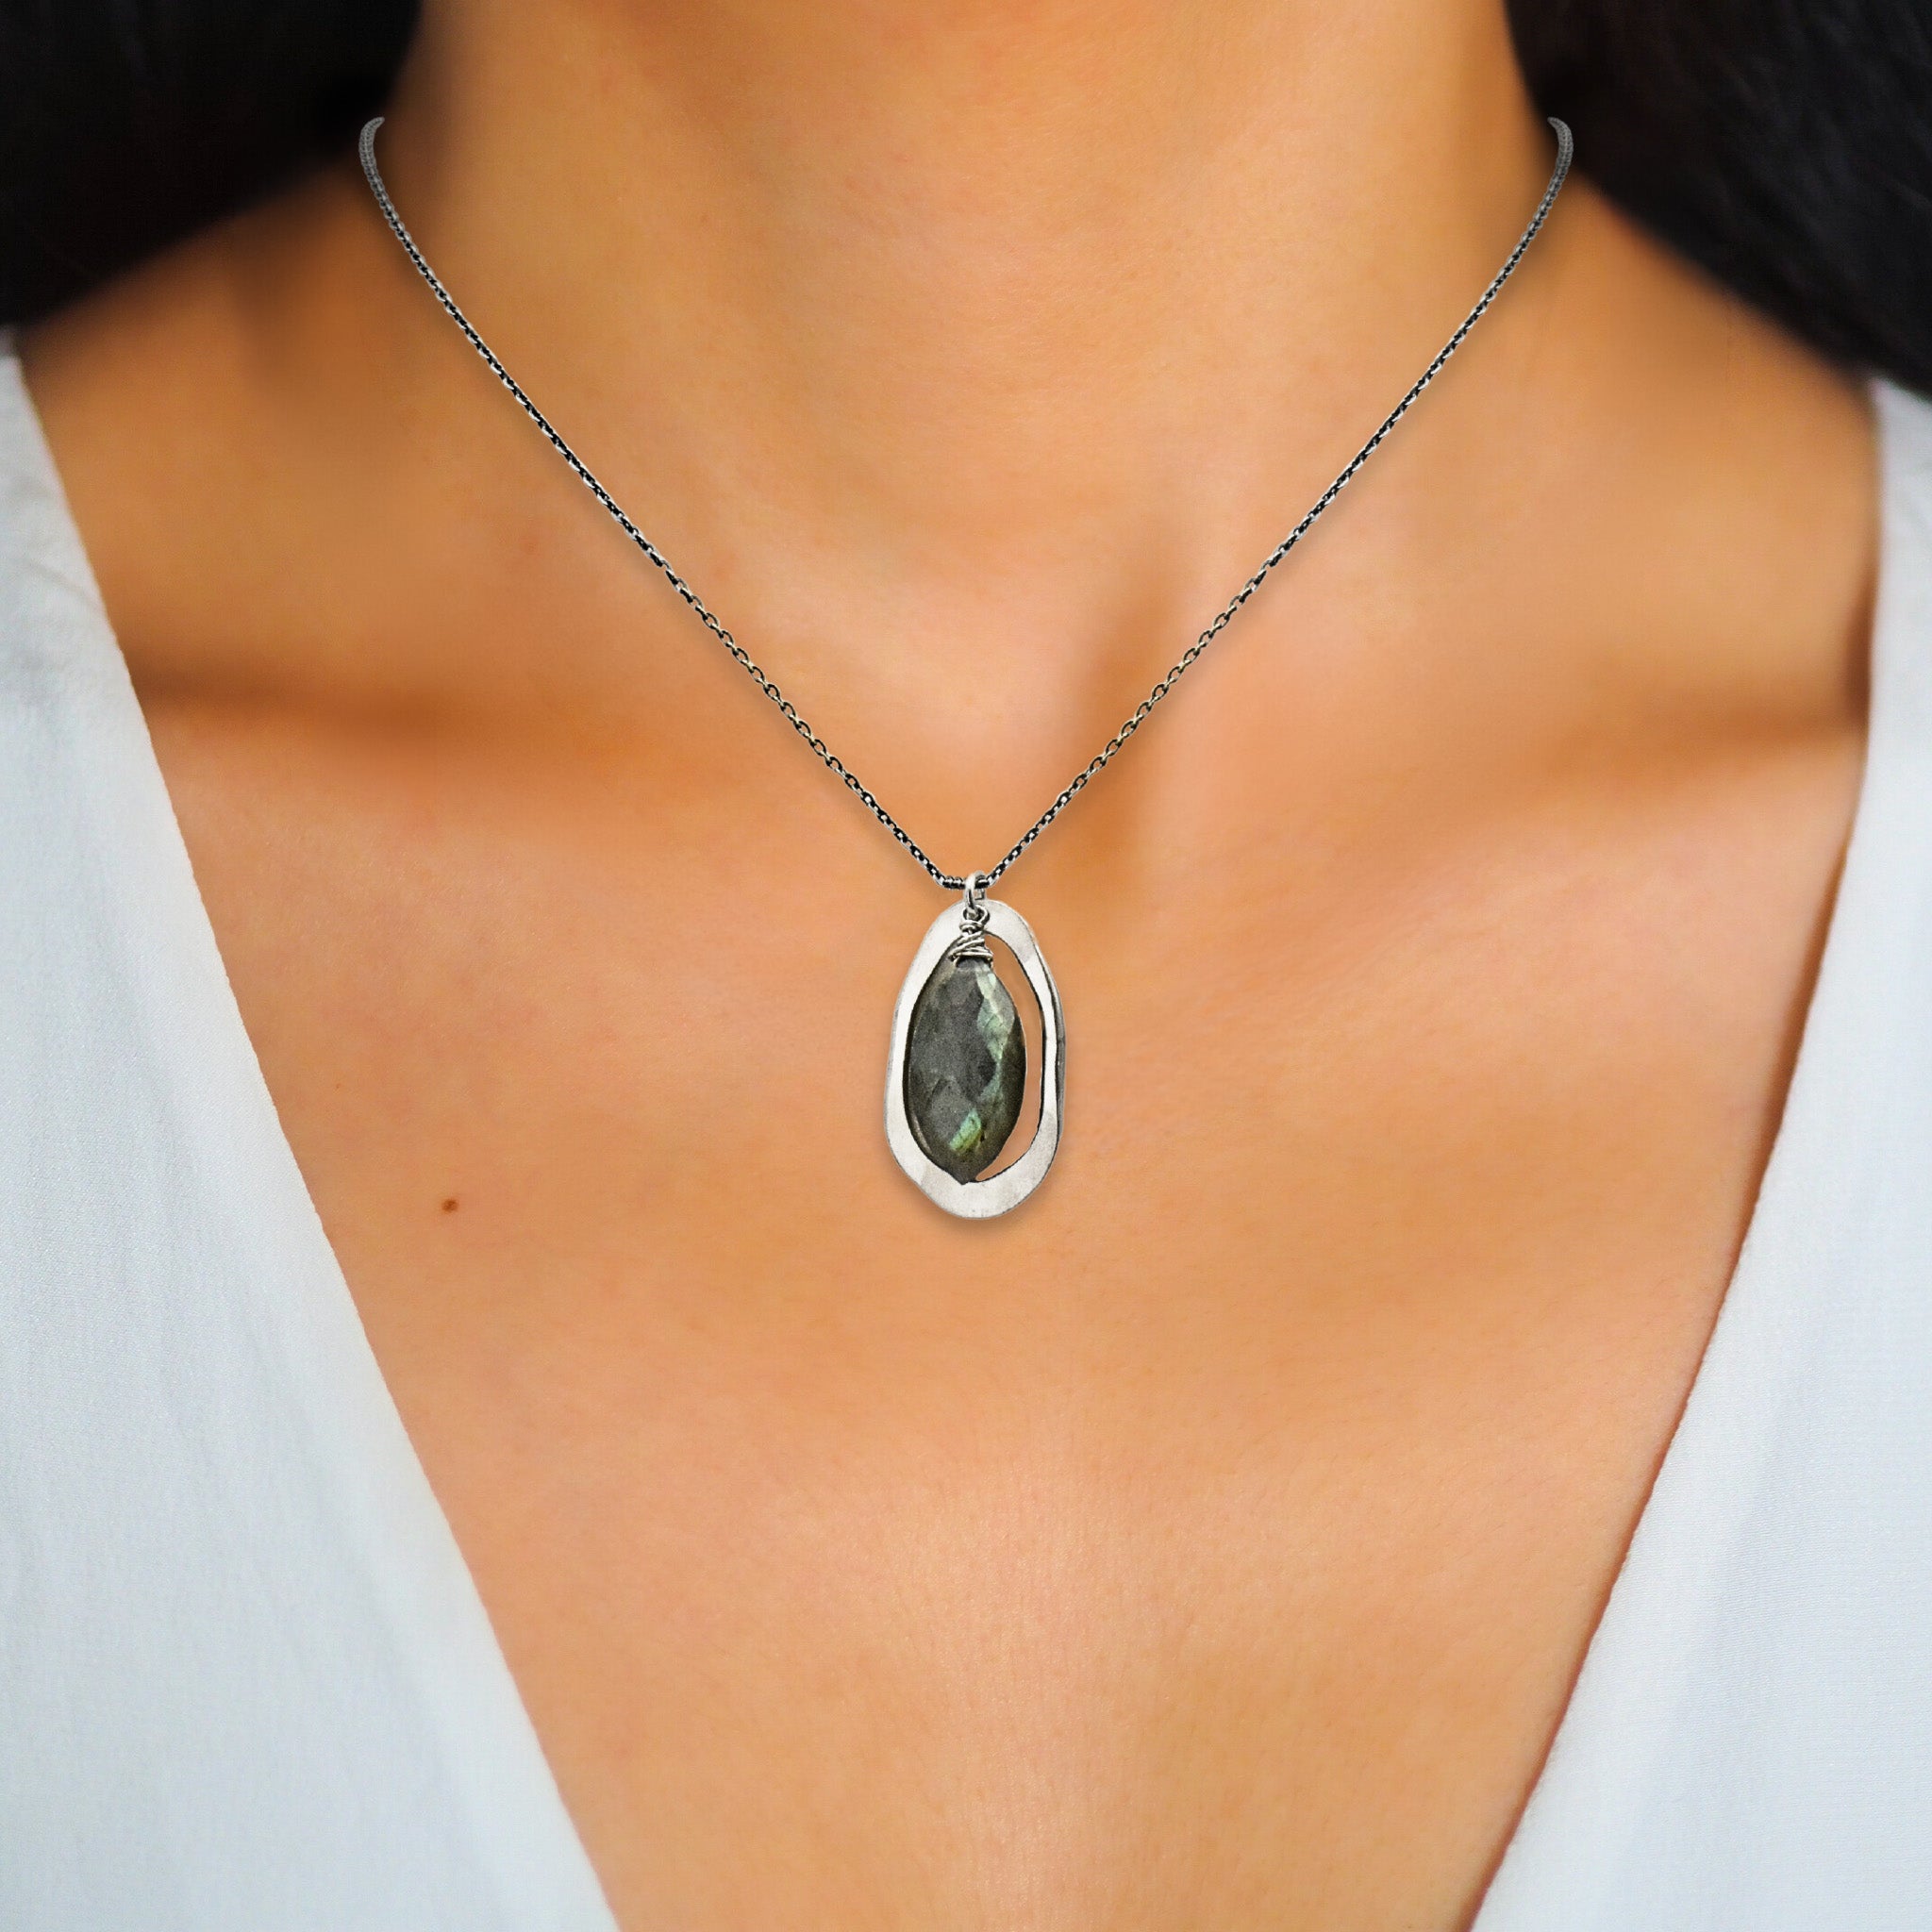 Glimmer Necklace - Necklaces